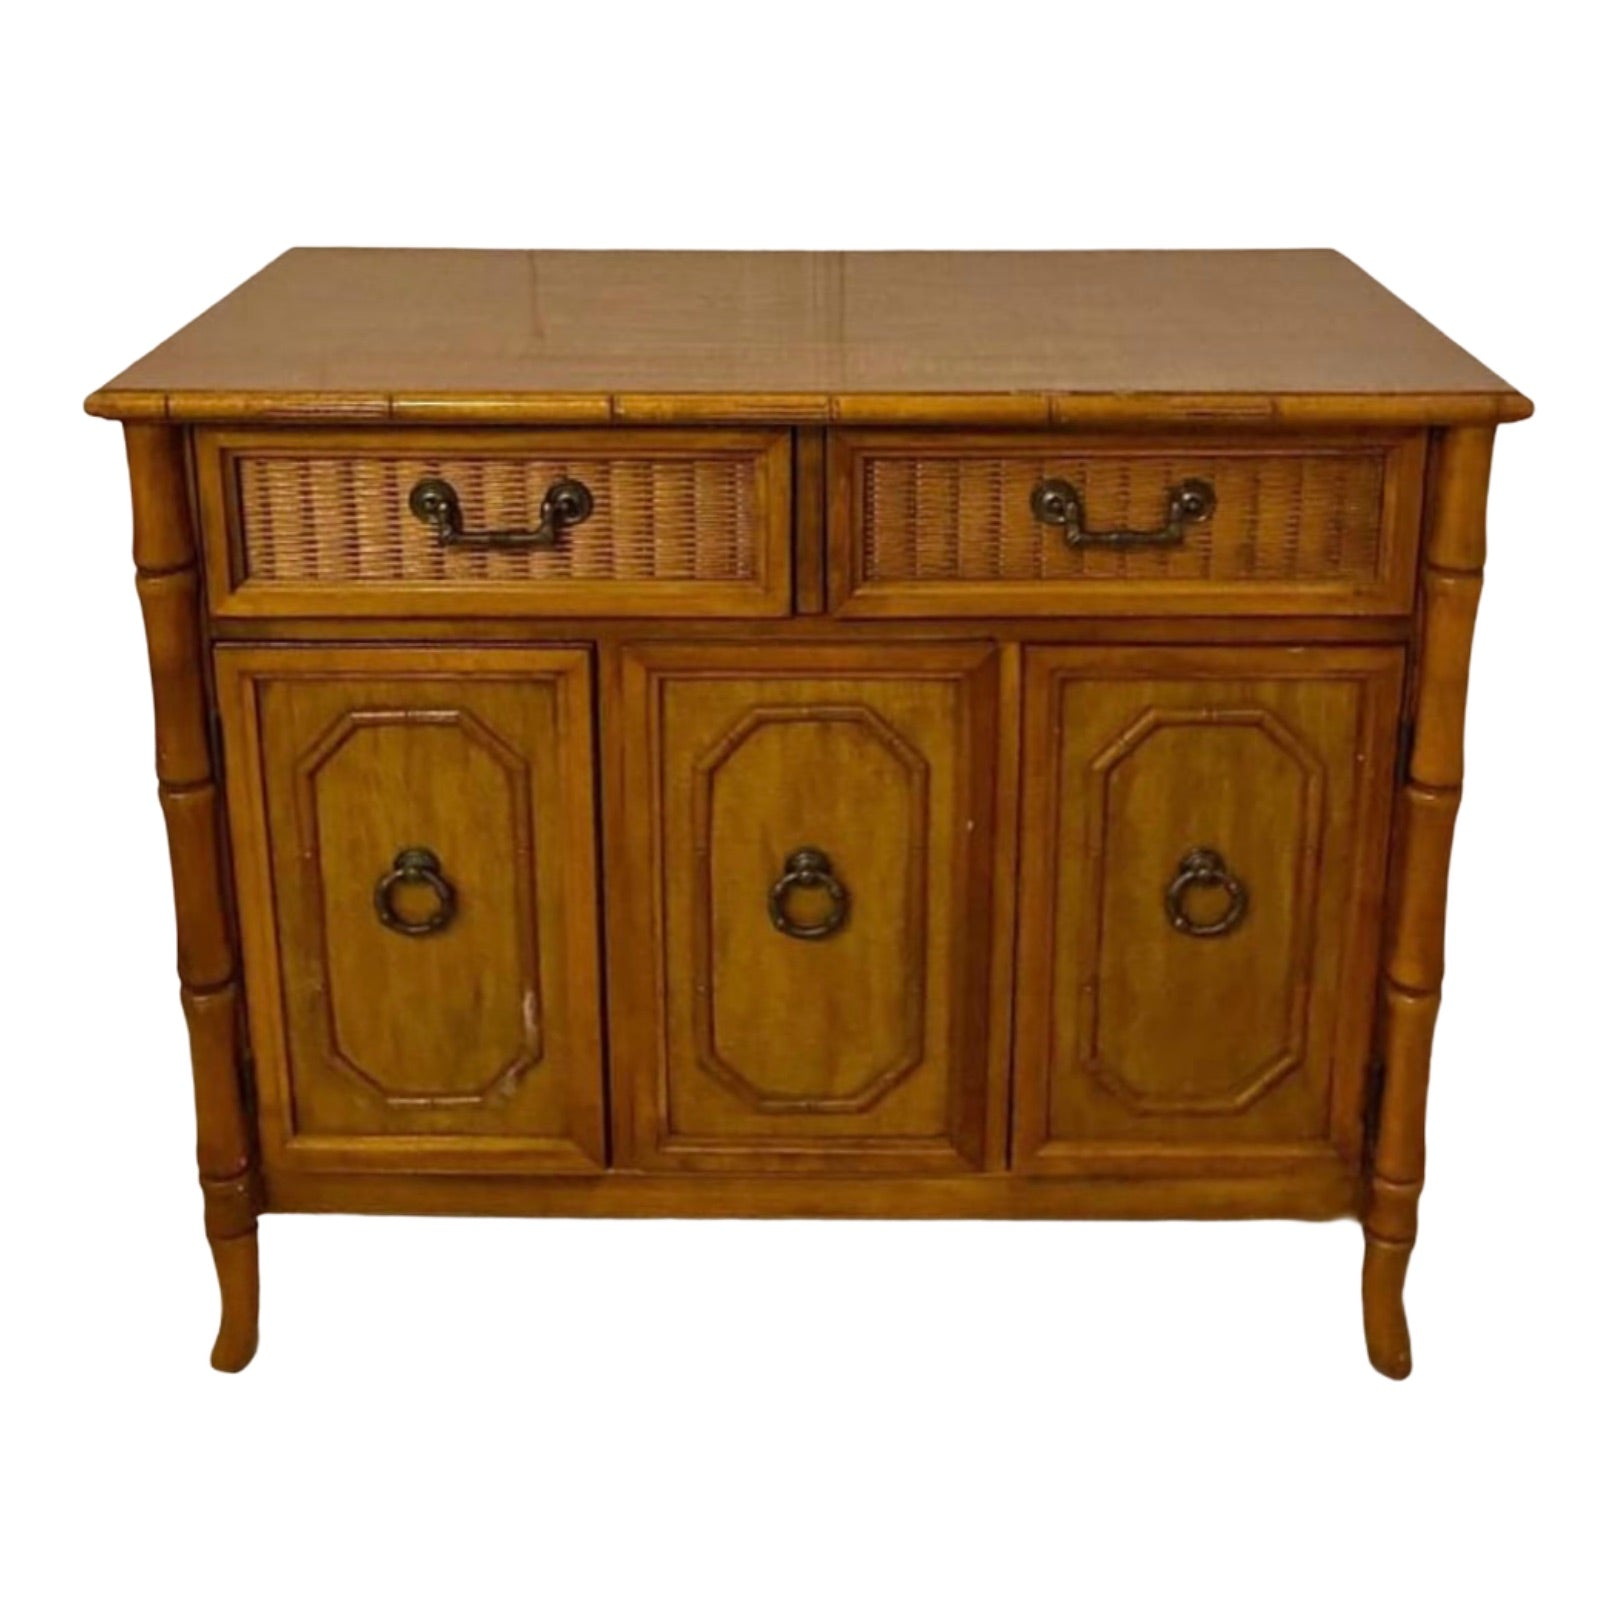 Vintage Broyhill Faux Bamboo Server Available for Custom Lacquer